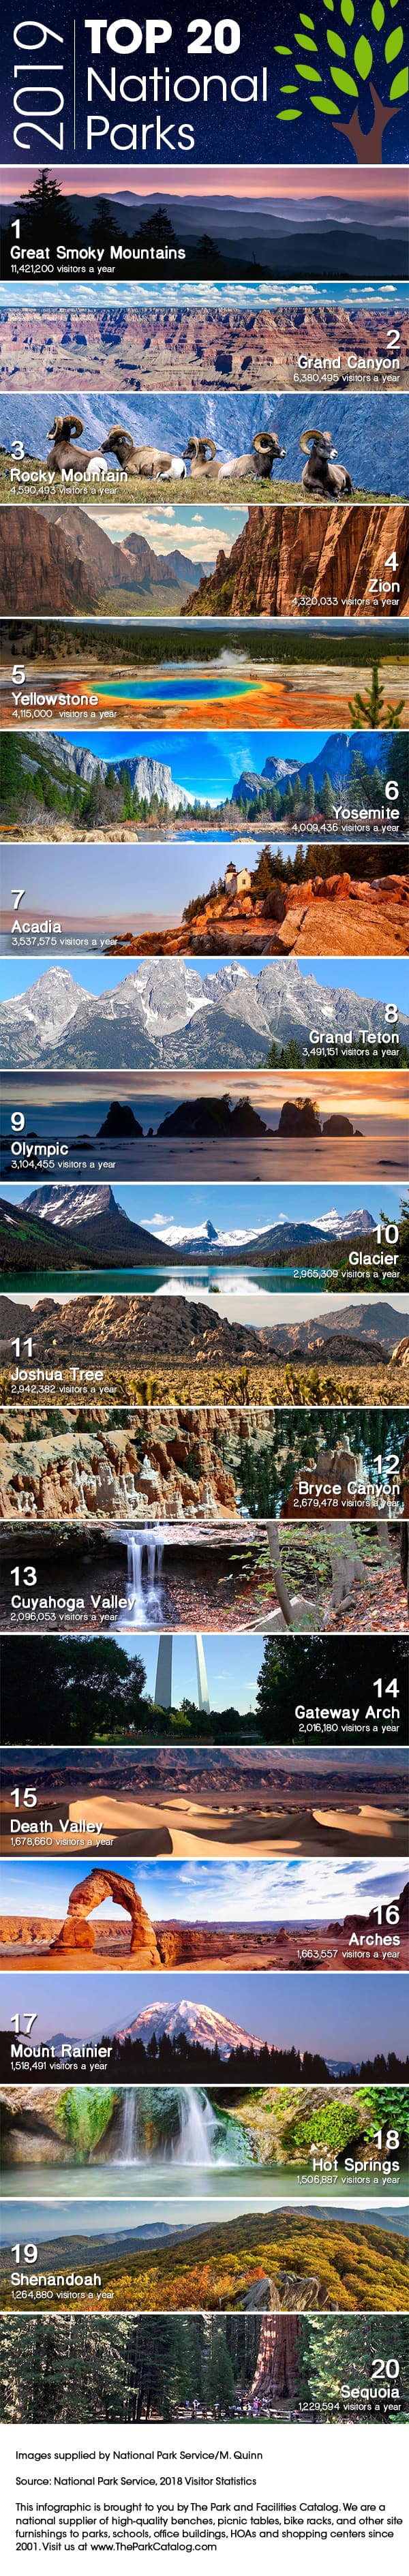 top 20 national parks